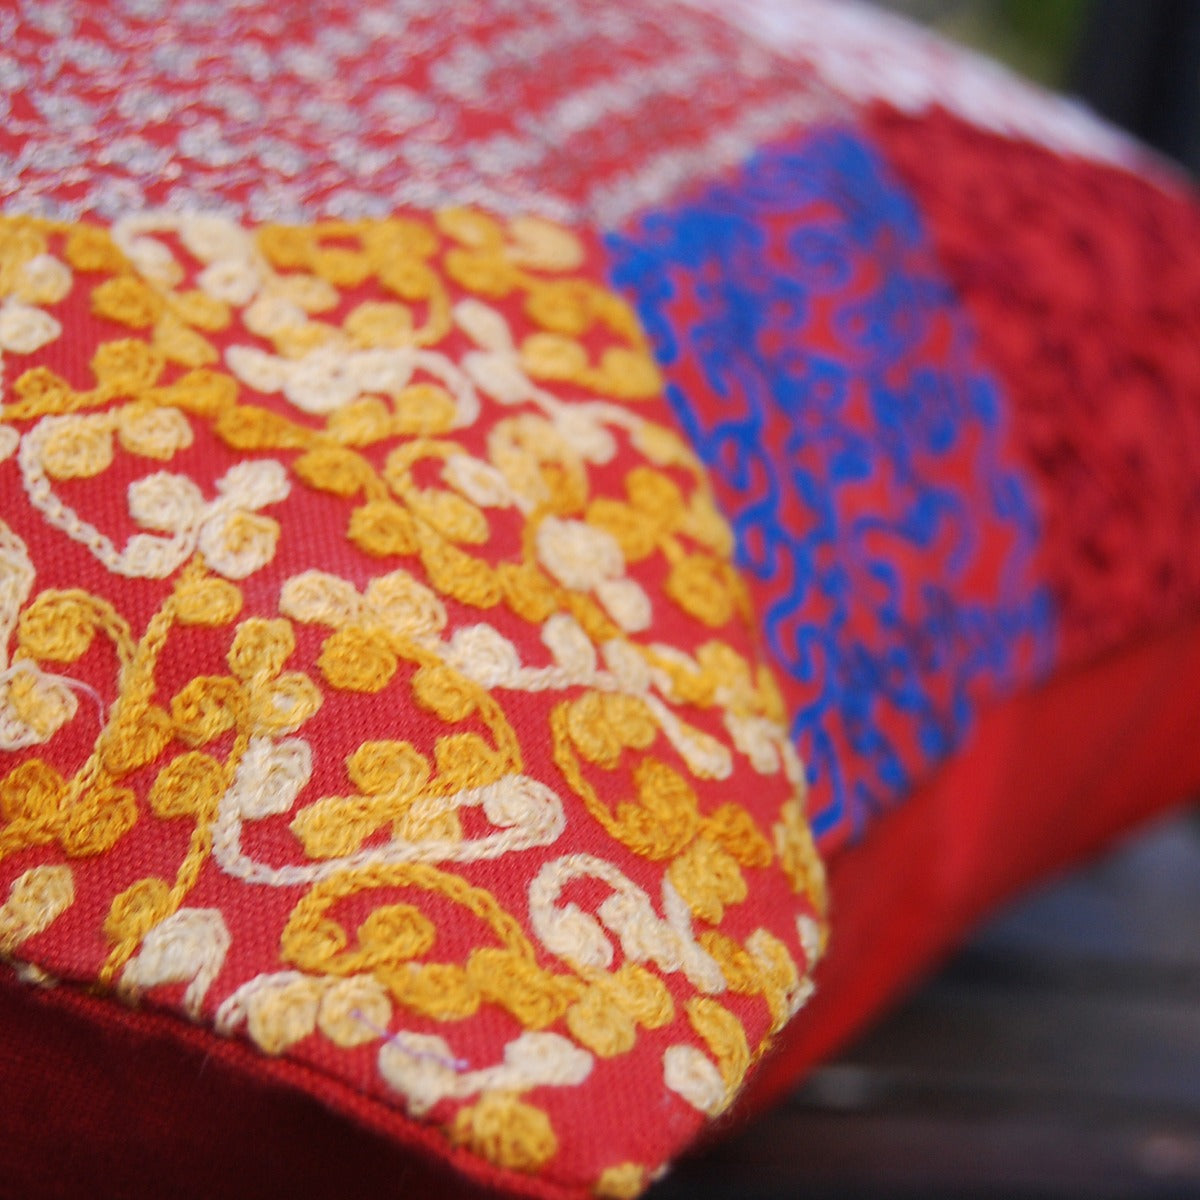 Indian Suzani Pillow Cover Embroidery Cushions Boho Decor - CraftJaipur